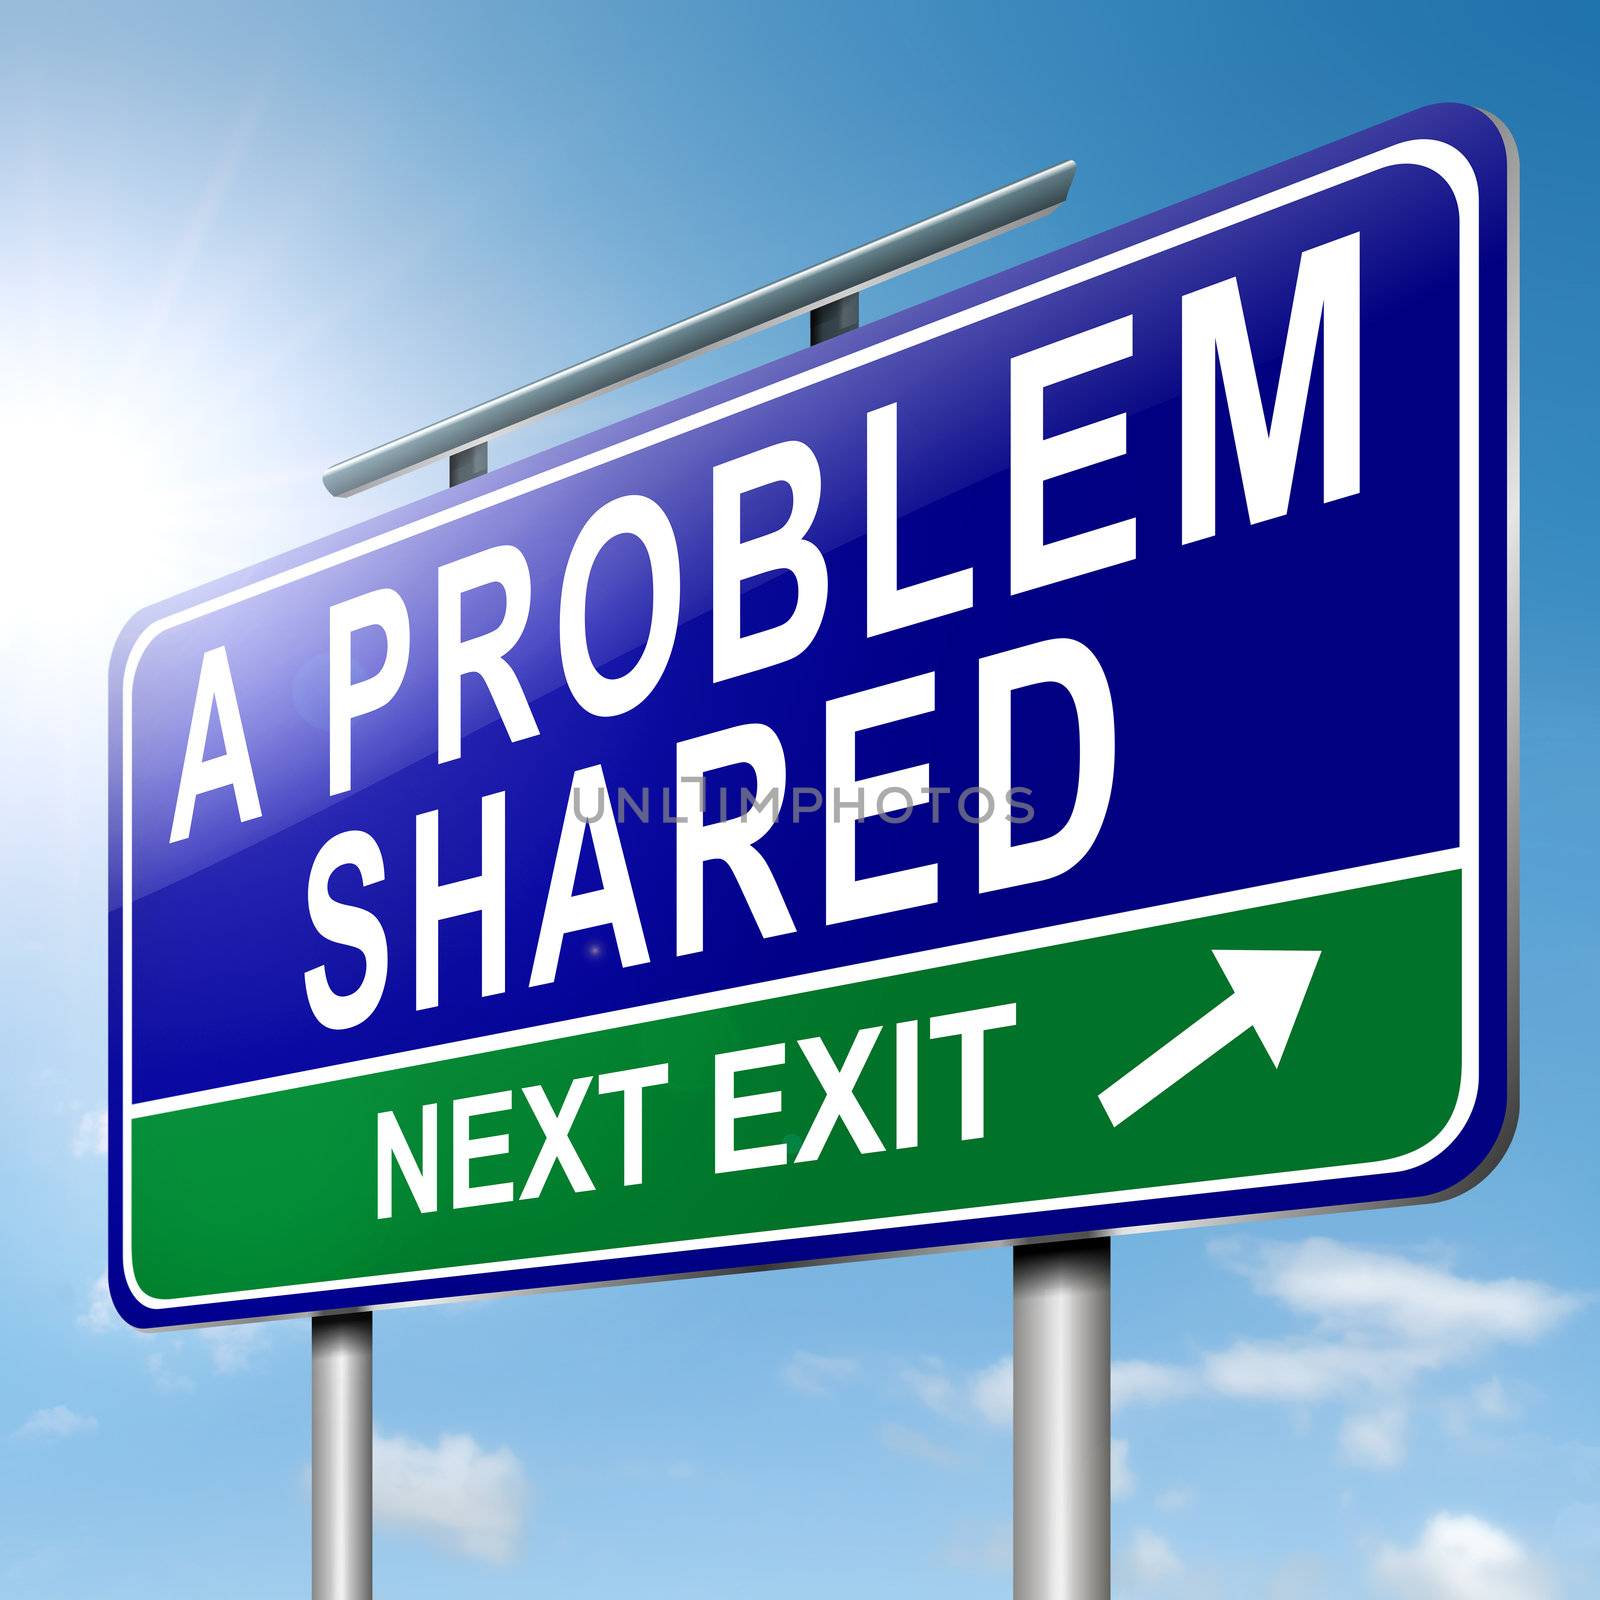 Illustration depicting a roadsign with 'a problem shared' concept. Blue sky background.